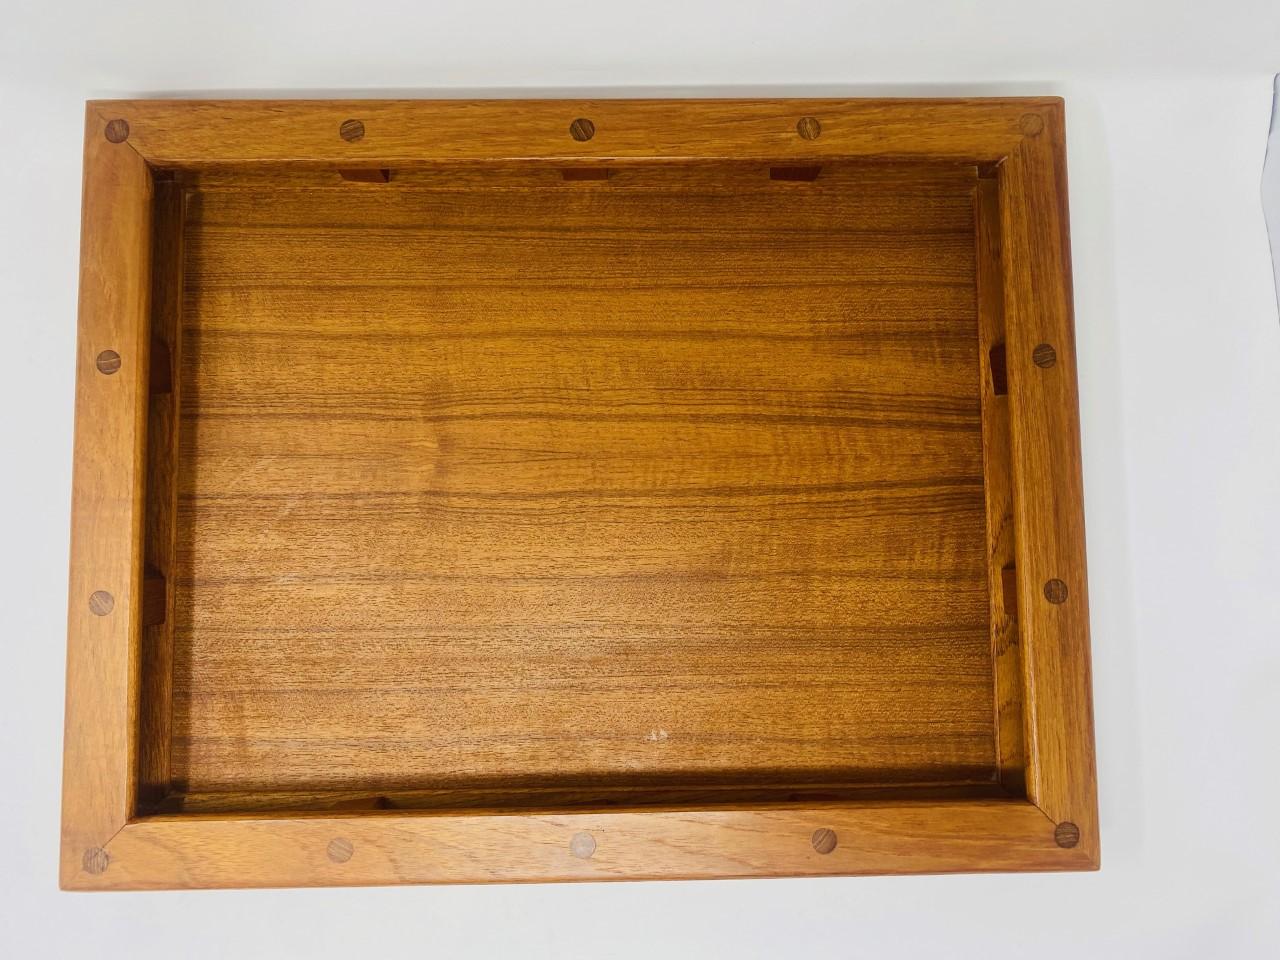 Beautiful serving tray in teak by Dansk. This piece is well crafted in solid teak wood and built in rail styled handles. The piece has pegged detail construction that finishes a beautiful look. Branded mark to the verso manufactured by Dansk IHQ